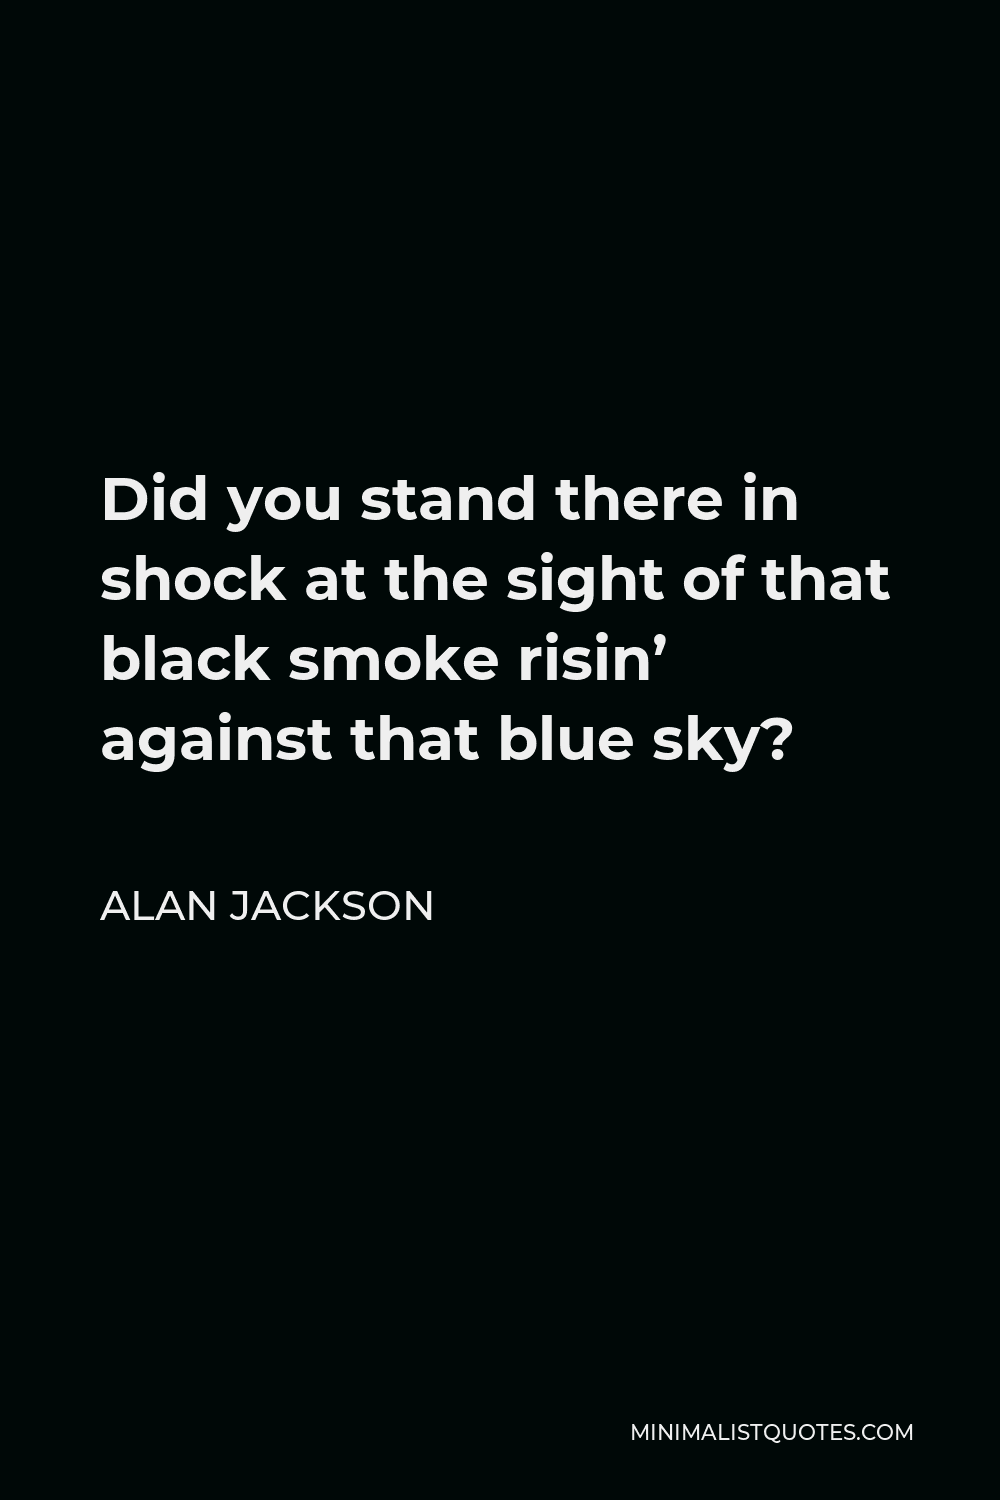 Alan Jackson Quote - Did you stand there in shock at the sight of that black smoke risin’ against that blue sky?